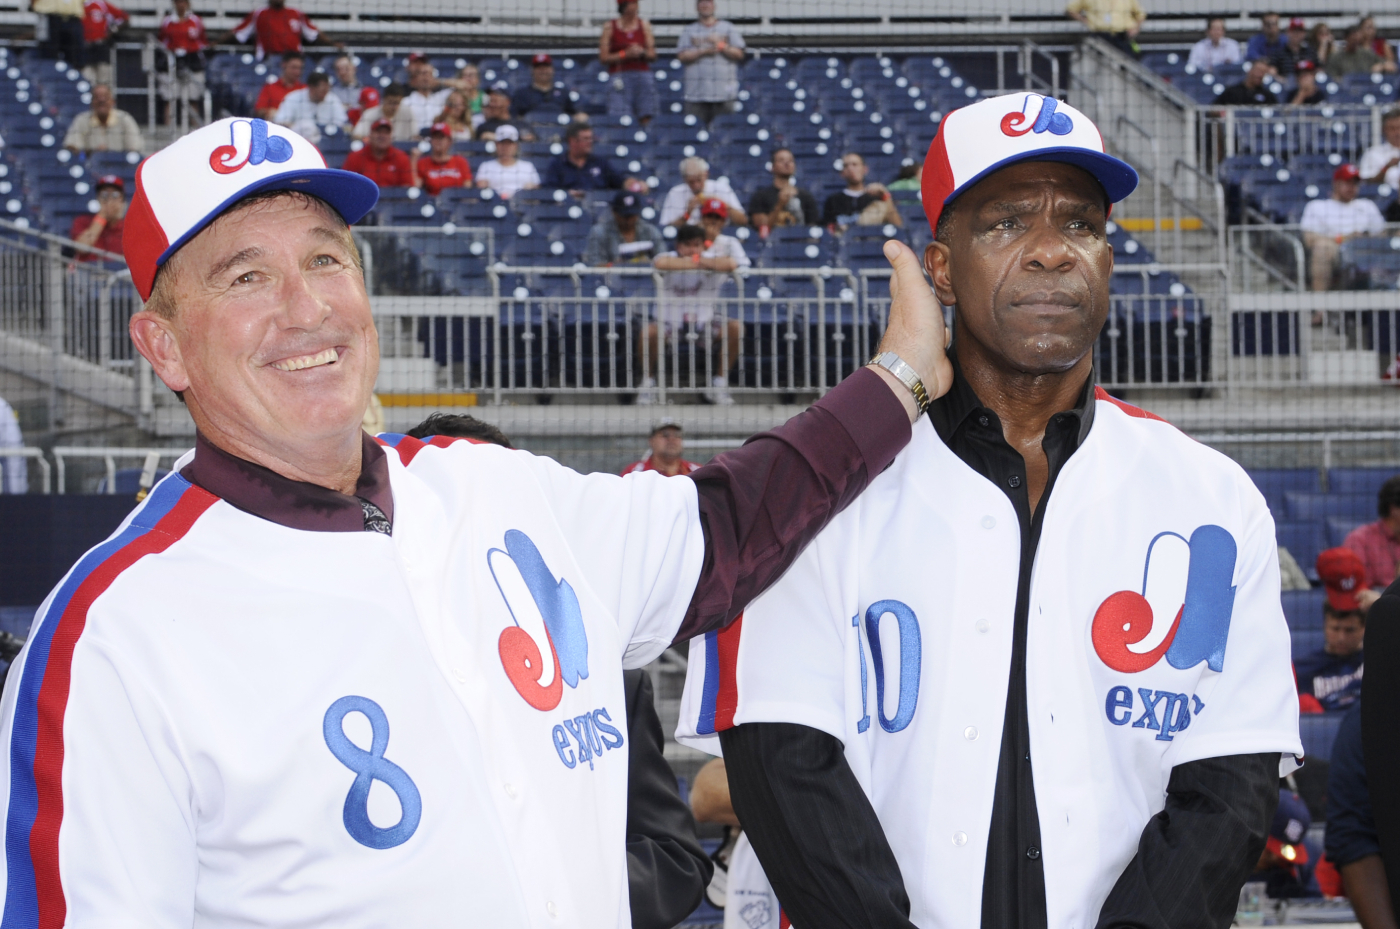 New baseball Hall of Famer Gary Carter is joined by his wife, Sandy,  News Photo - Getty Images